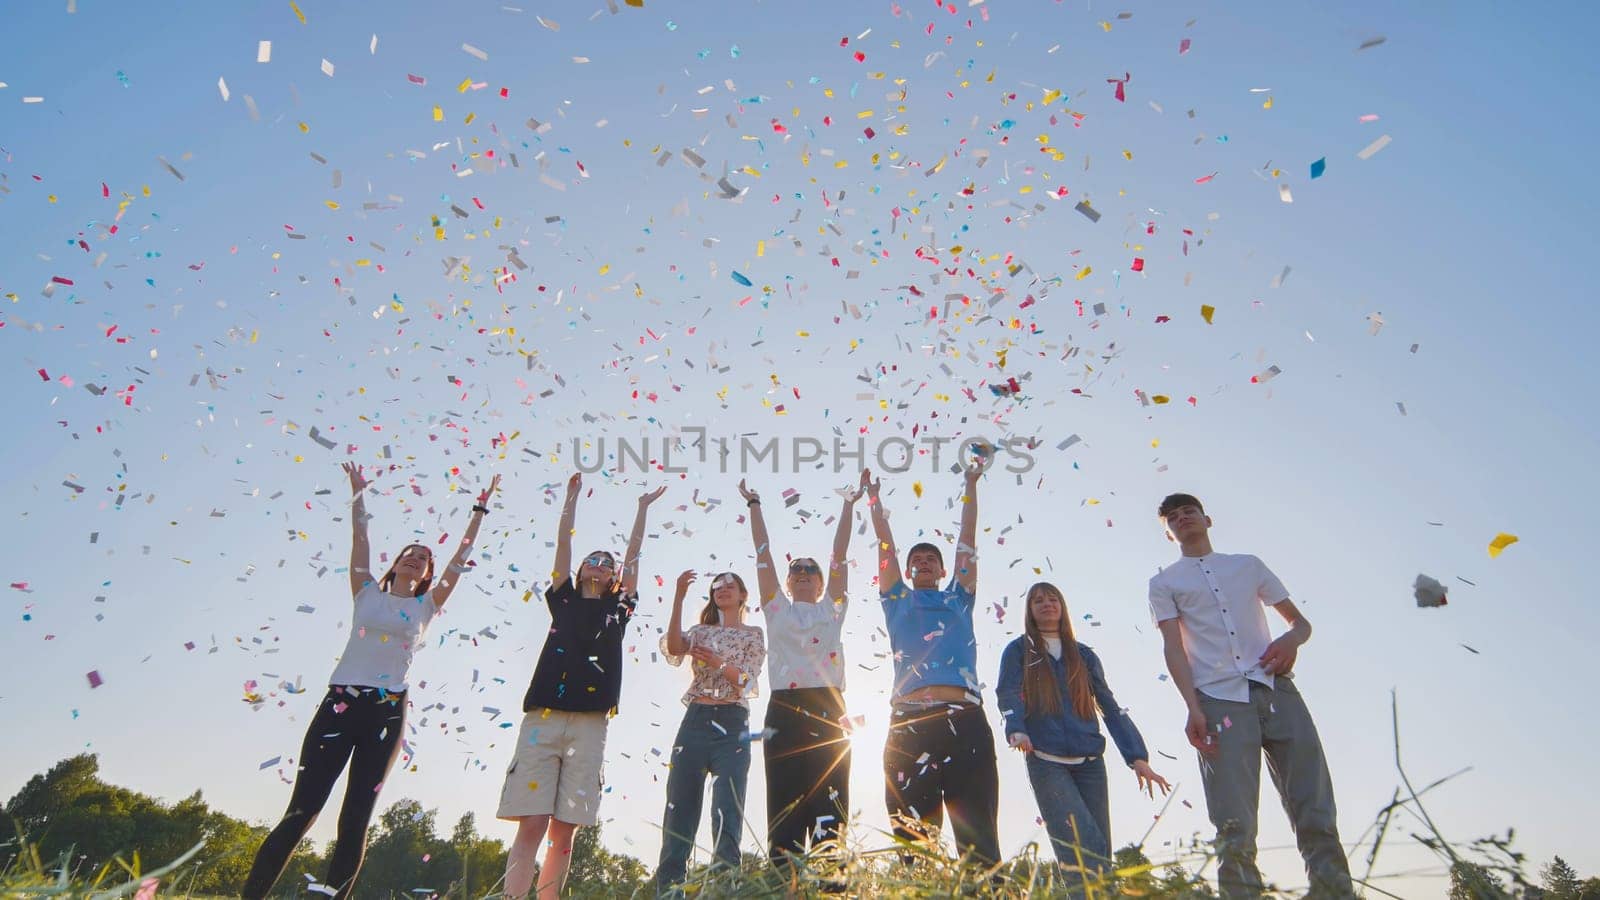 Friends toss colorful paper confetti from their hands against the rays of the evening sun